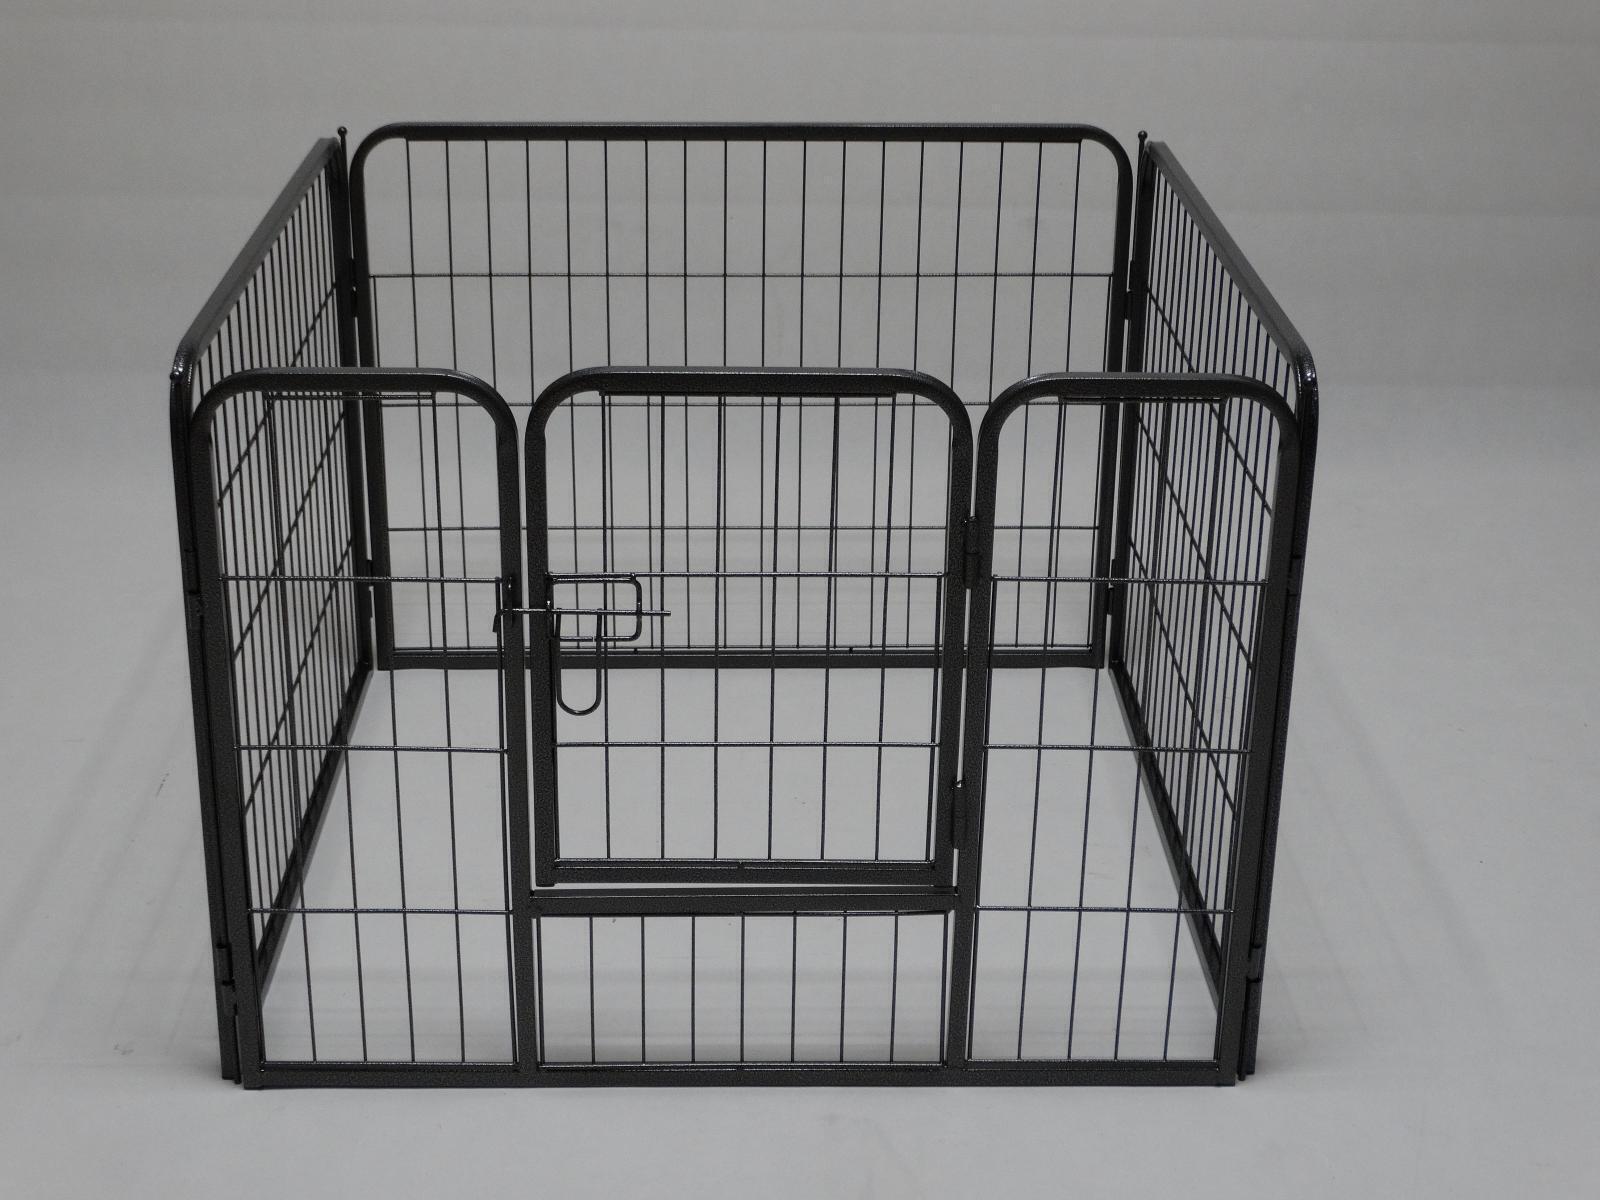 4 Panel Heavy Duty Pet Dog Puppy Cat Rabbit Exercise Playpen Fence Extension Price